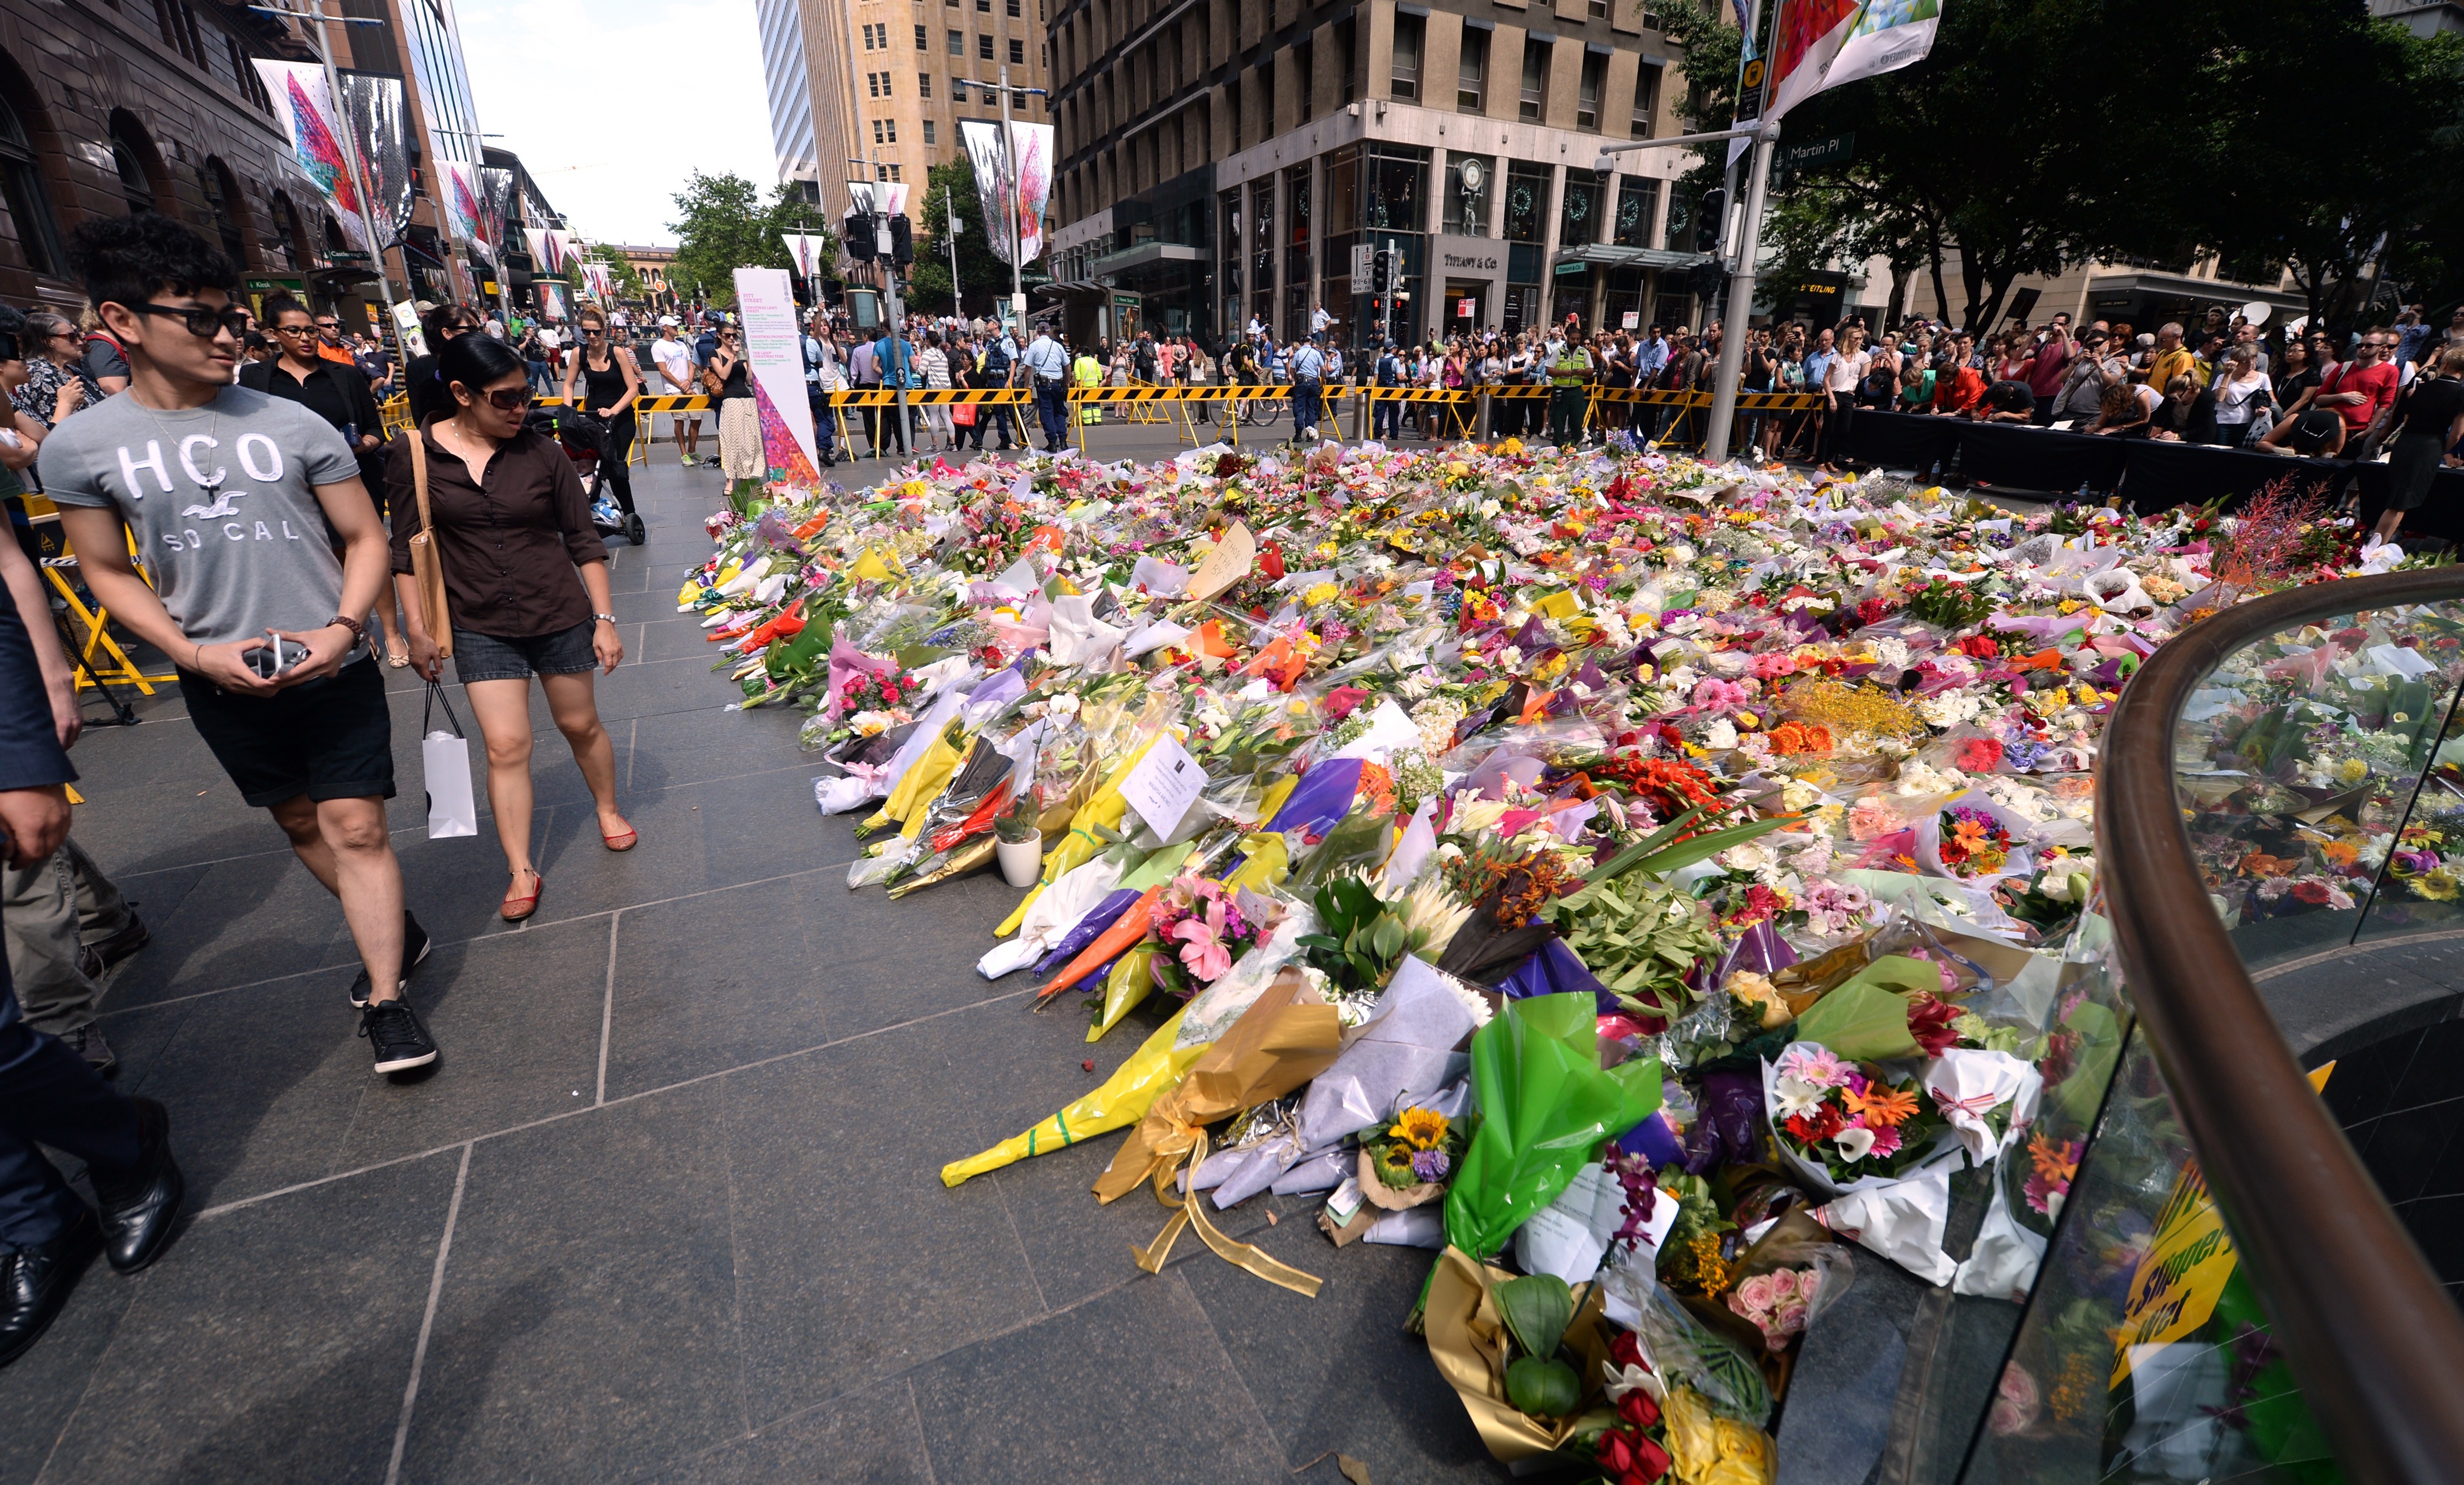 Visitors look at a makeshift memorial near the scene of the fatal siege in the heart of Sydney's financial district on Dec. 16, 2014. Sydneysiders including tearful office workers and Muslim women in hijabs laid flowers at the scene in an outpouring of grief and shock (Peter Parks—AFP/Getty Images)